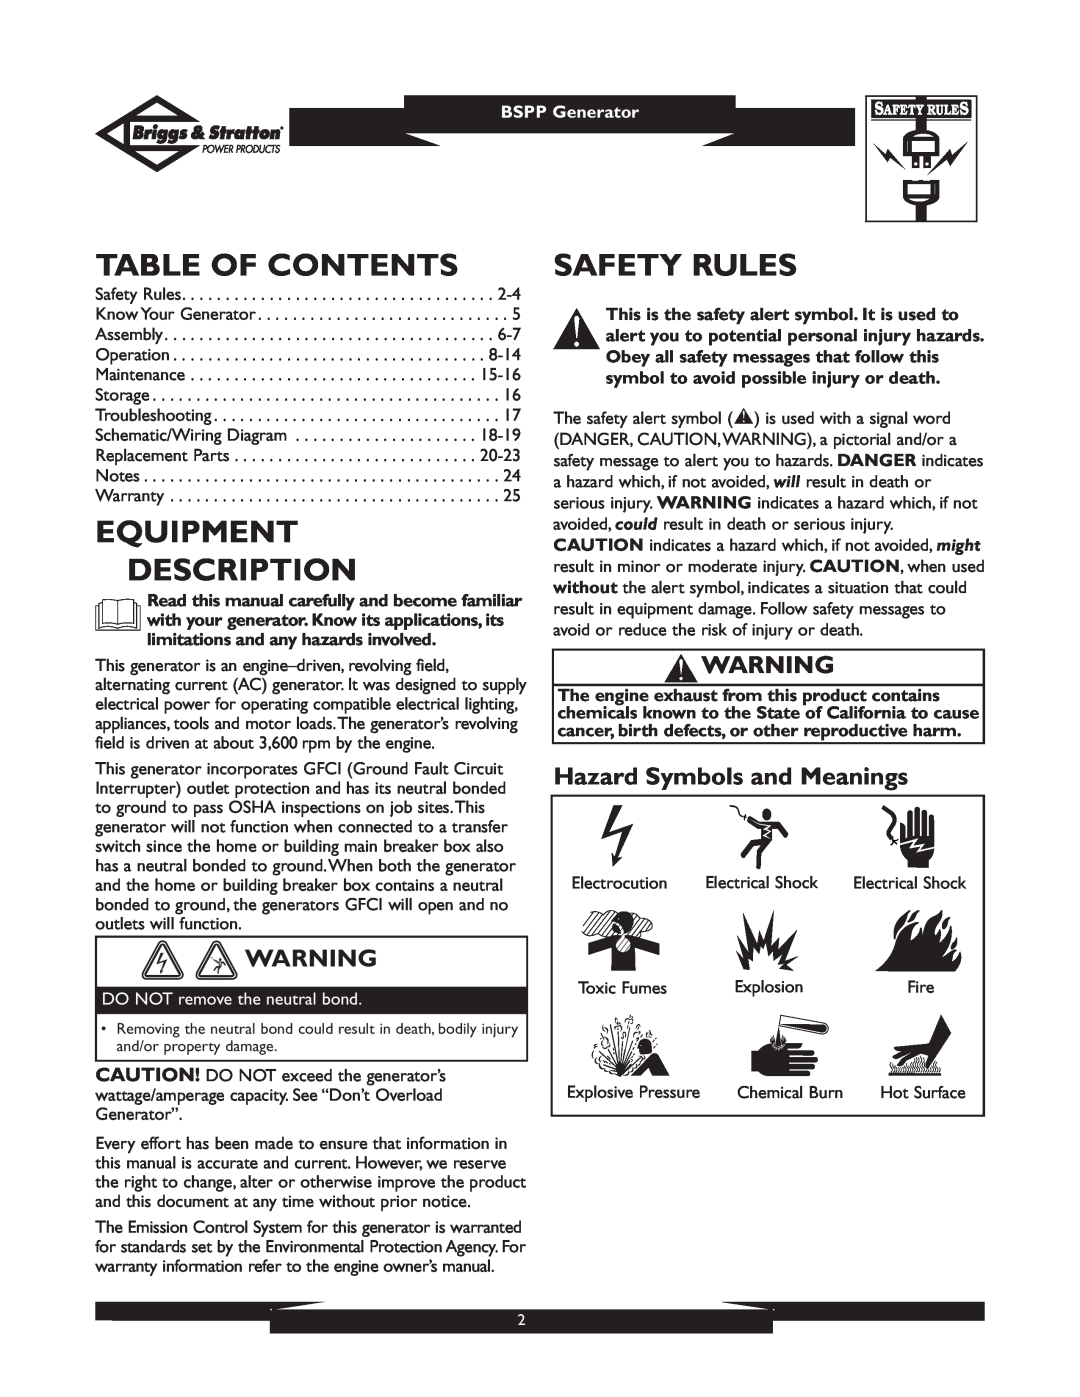 Briggs & Stratton PRO8000 owner manual Table Of Contents, Equipment Description, Safety Rules, Hazard Symbols and Meanings 